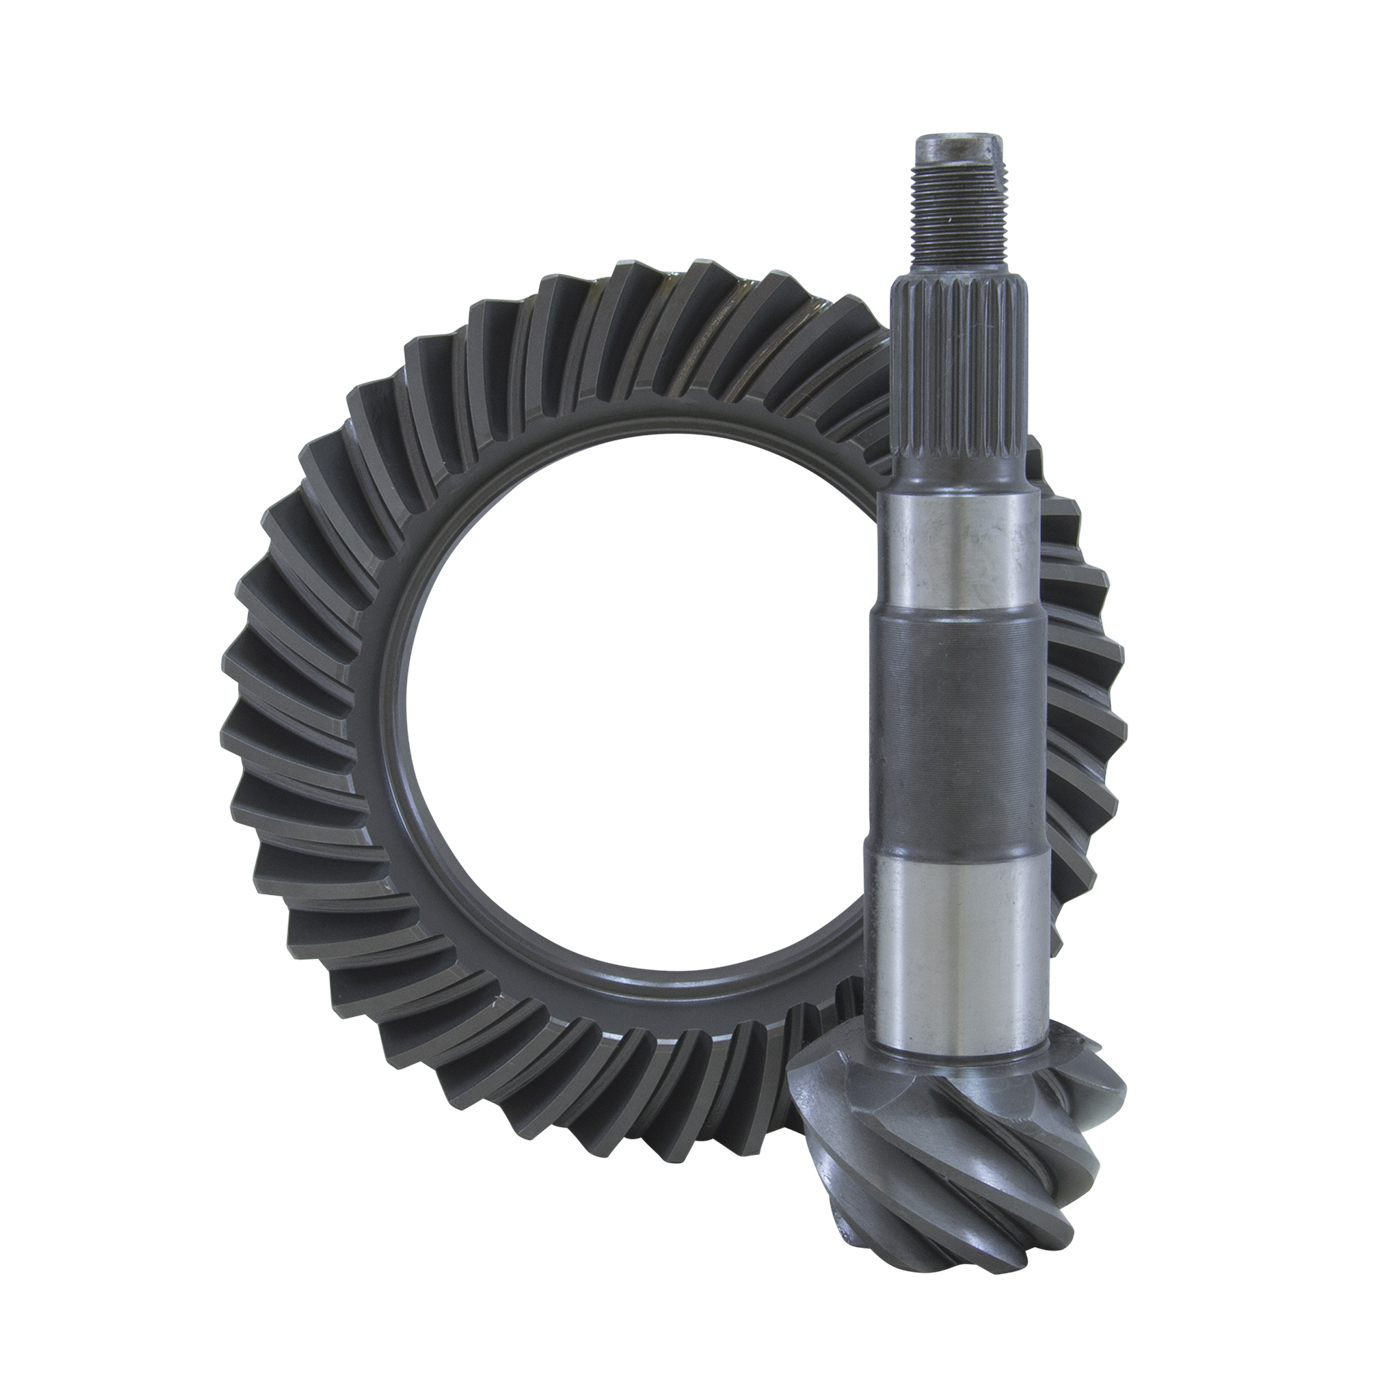 USA Standard Ring & Pinion Gear Set for Toyota 7.5" in a 4.56 Ratio